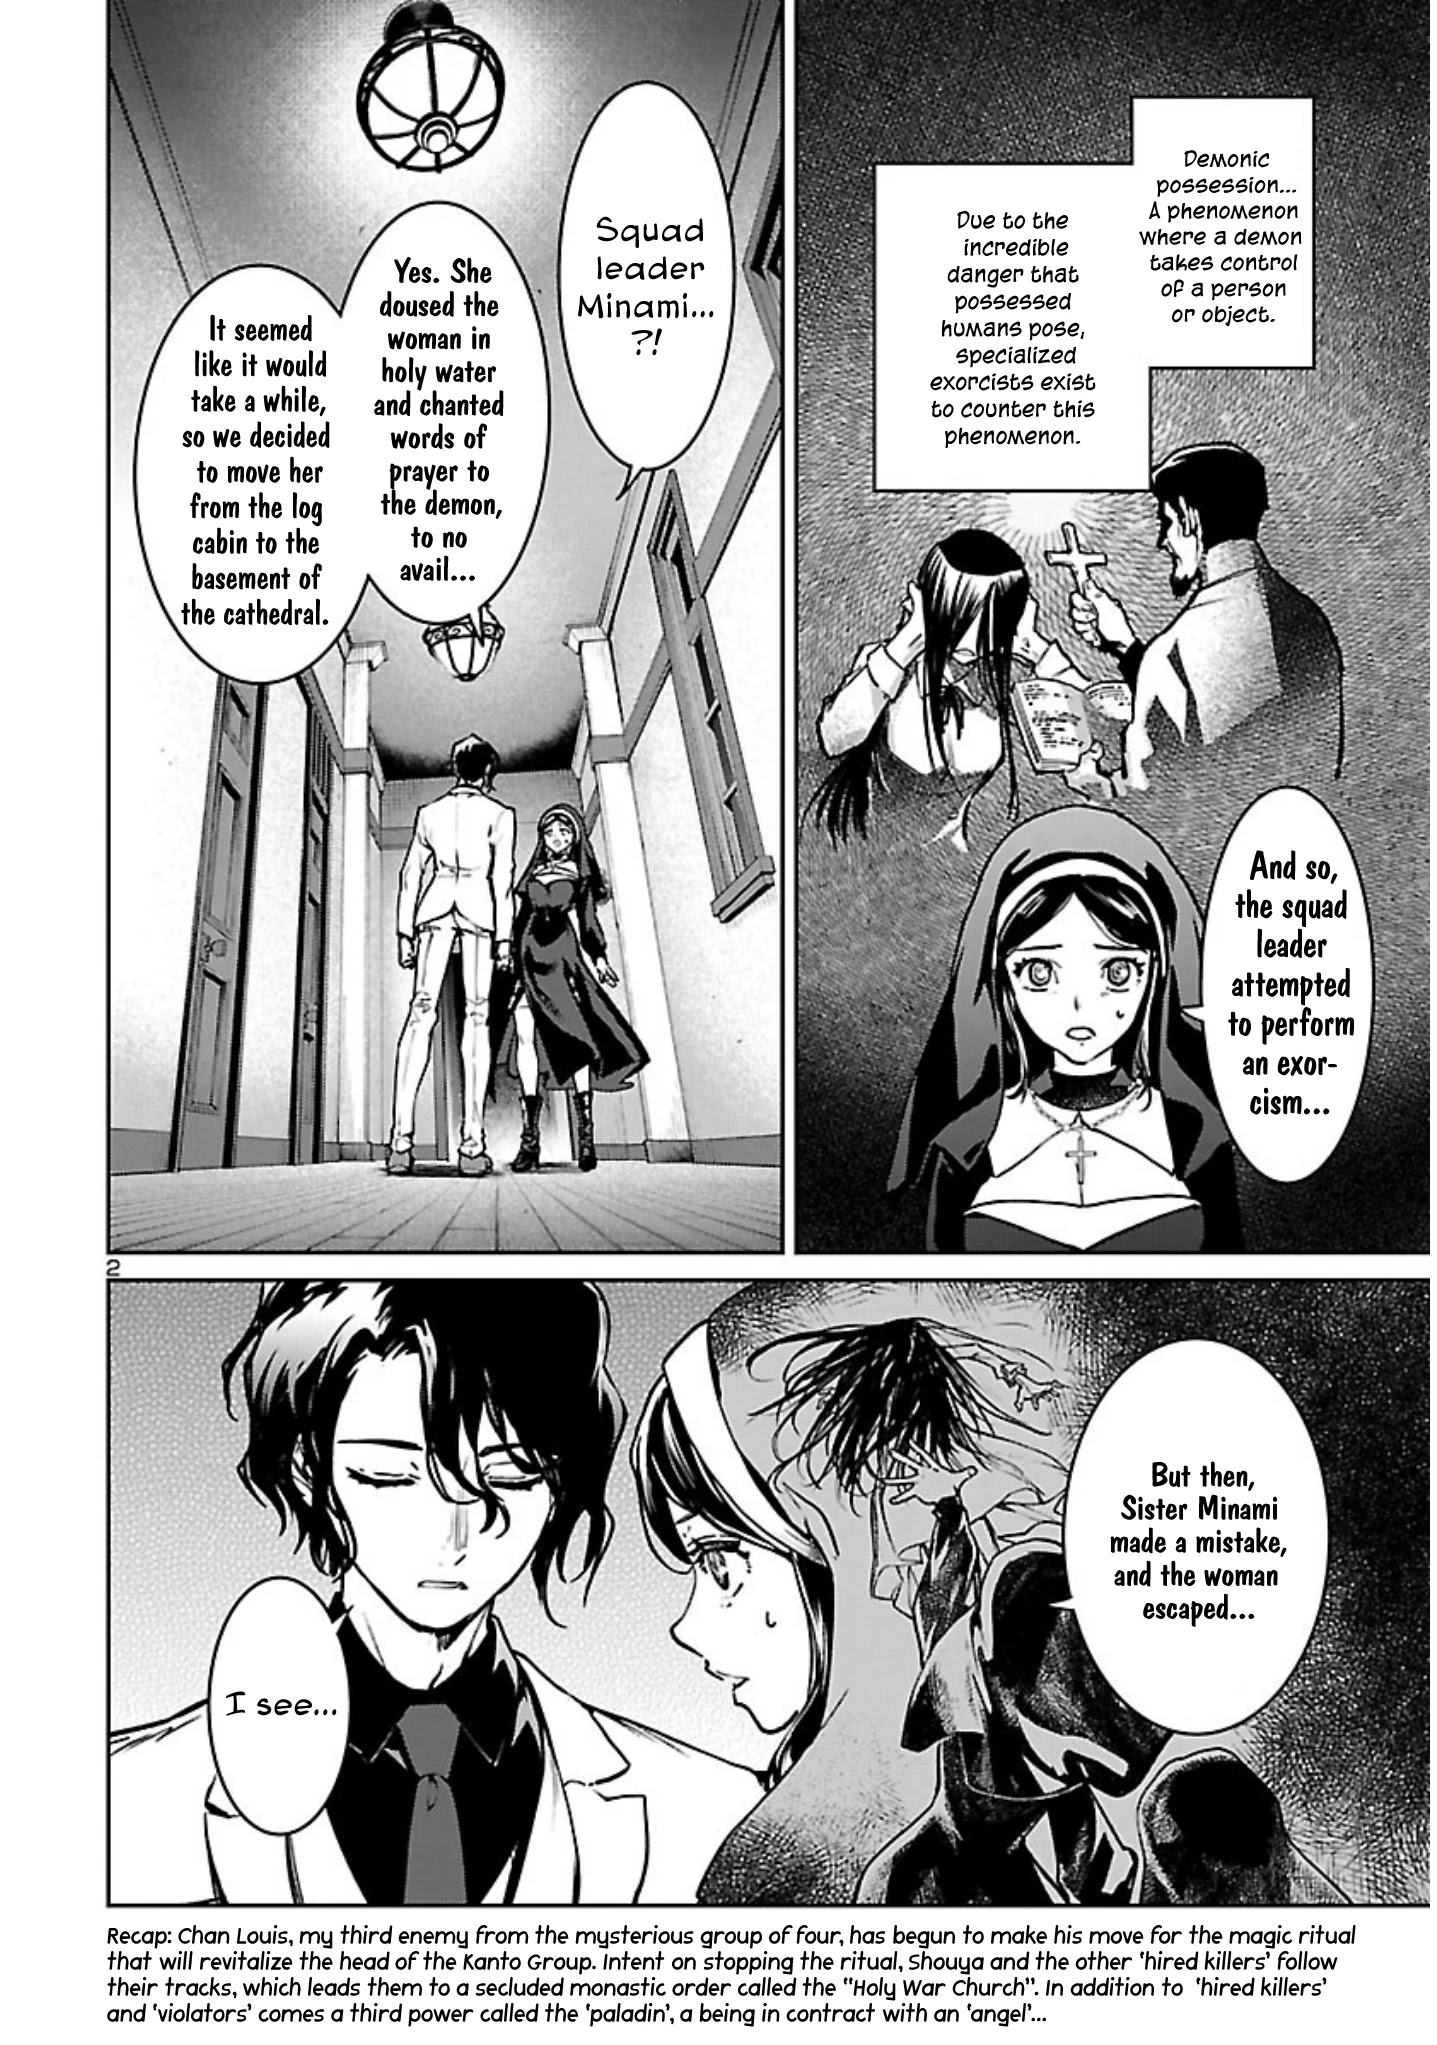 Succubus & Hitman Vol.4 Chapter 18: The Sinful People's Boy Meets Girl - Picture 3